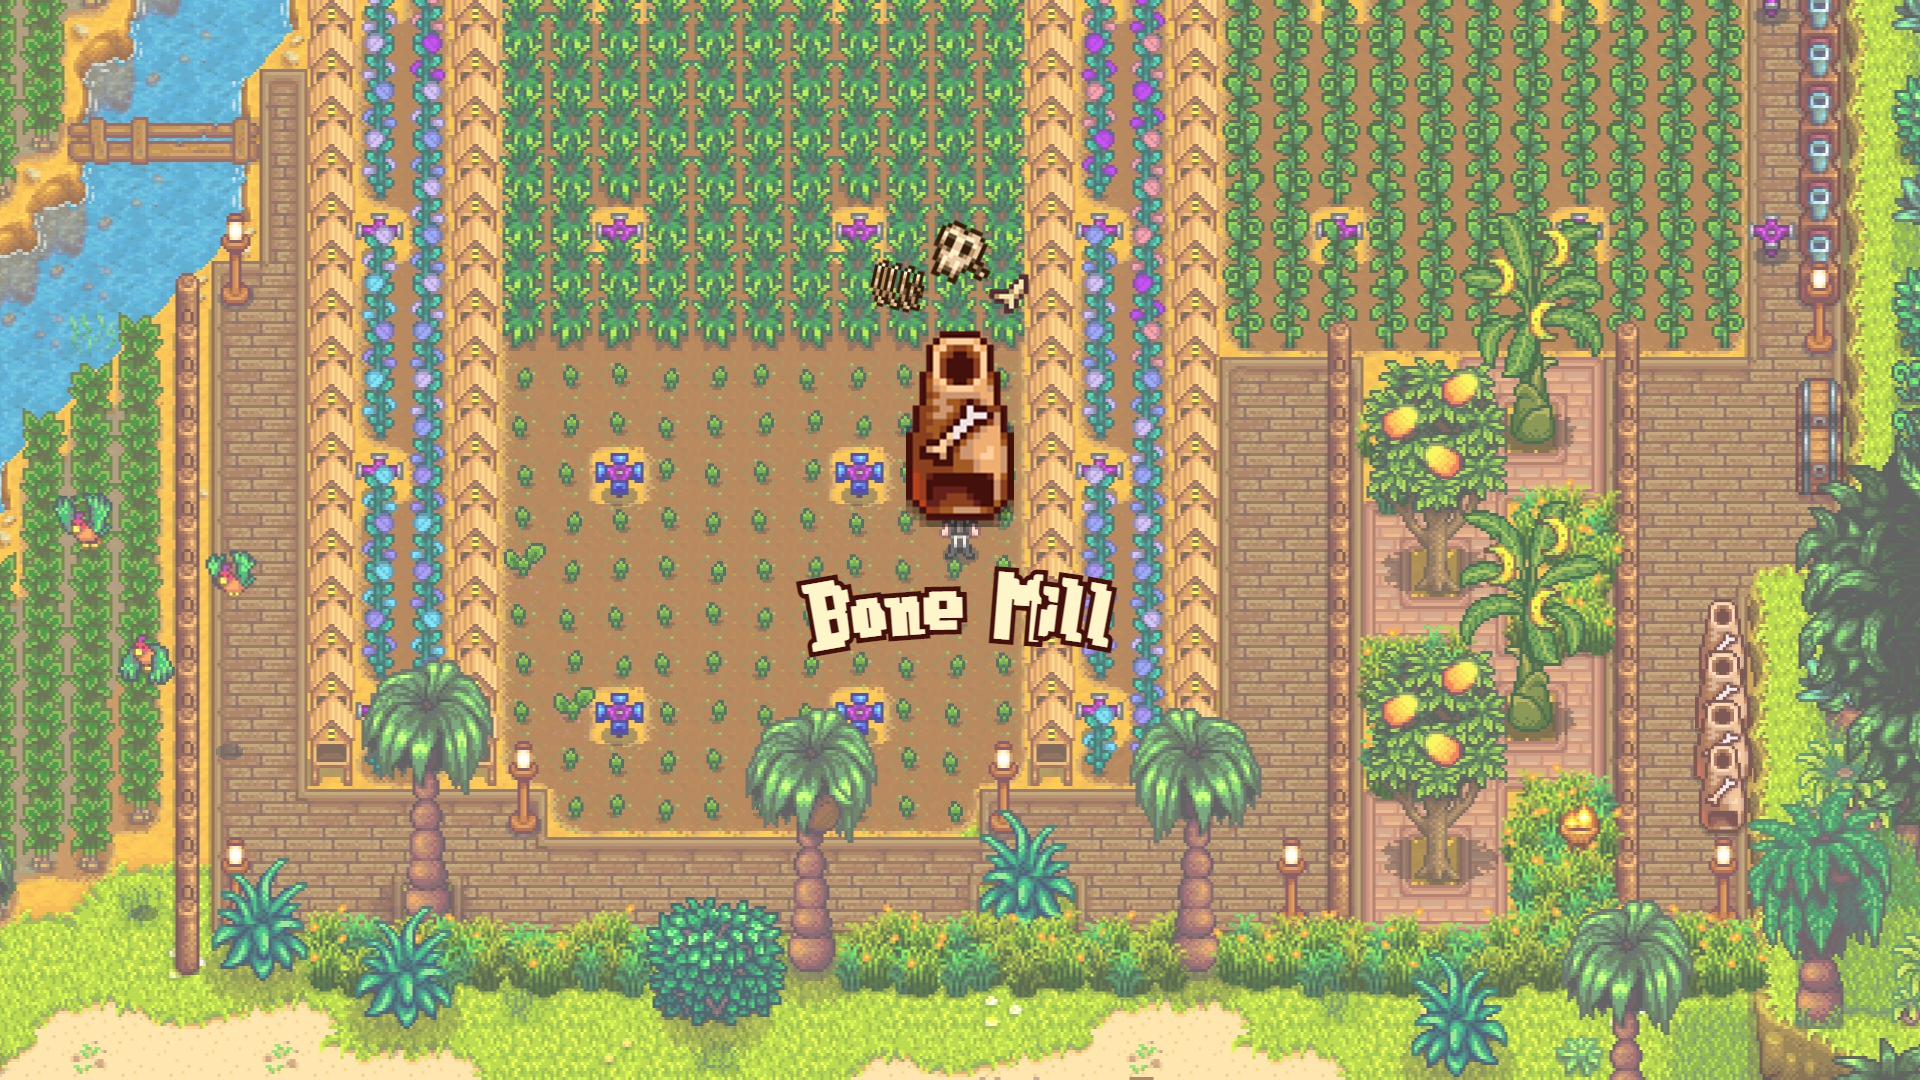 How to Use the Bone Mill in Stardew Valley